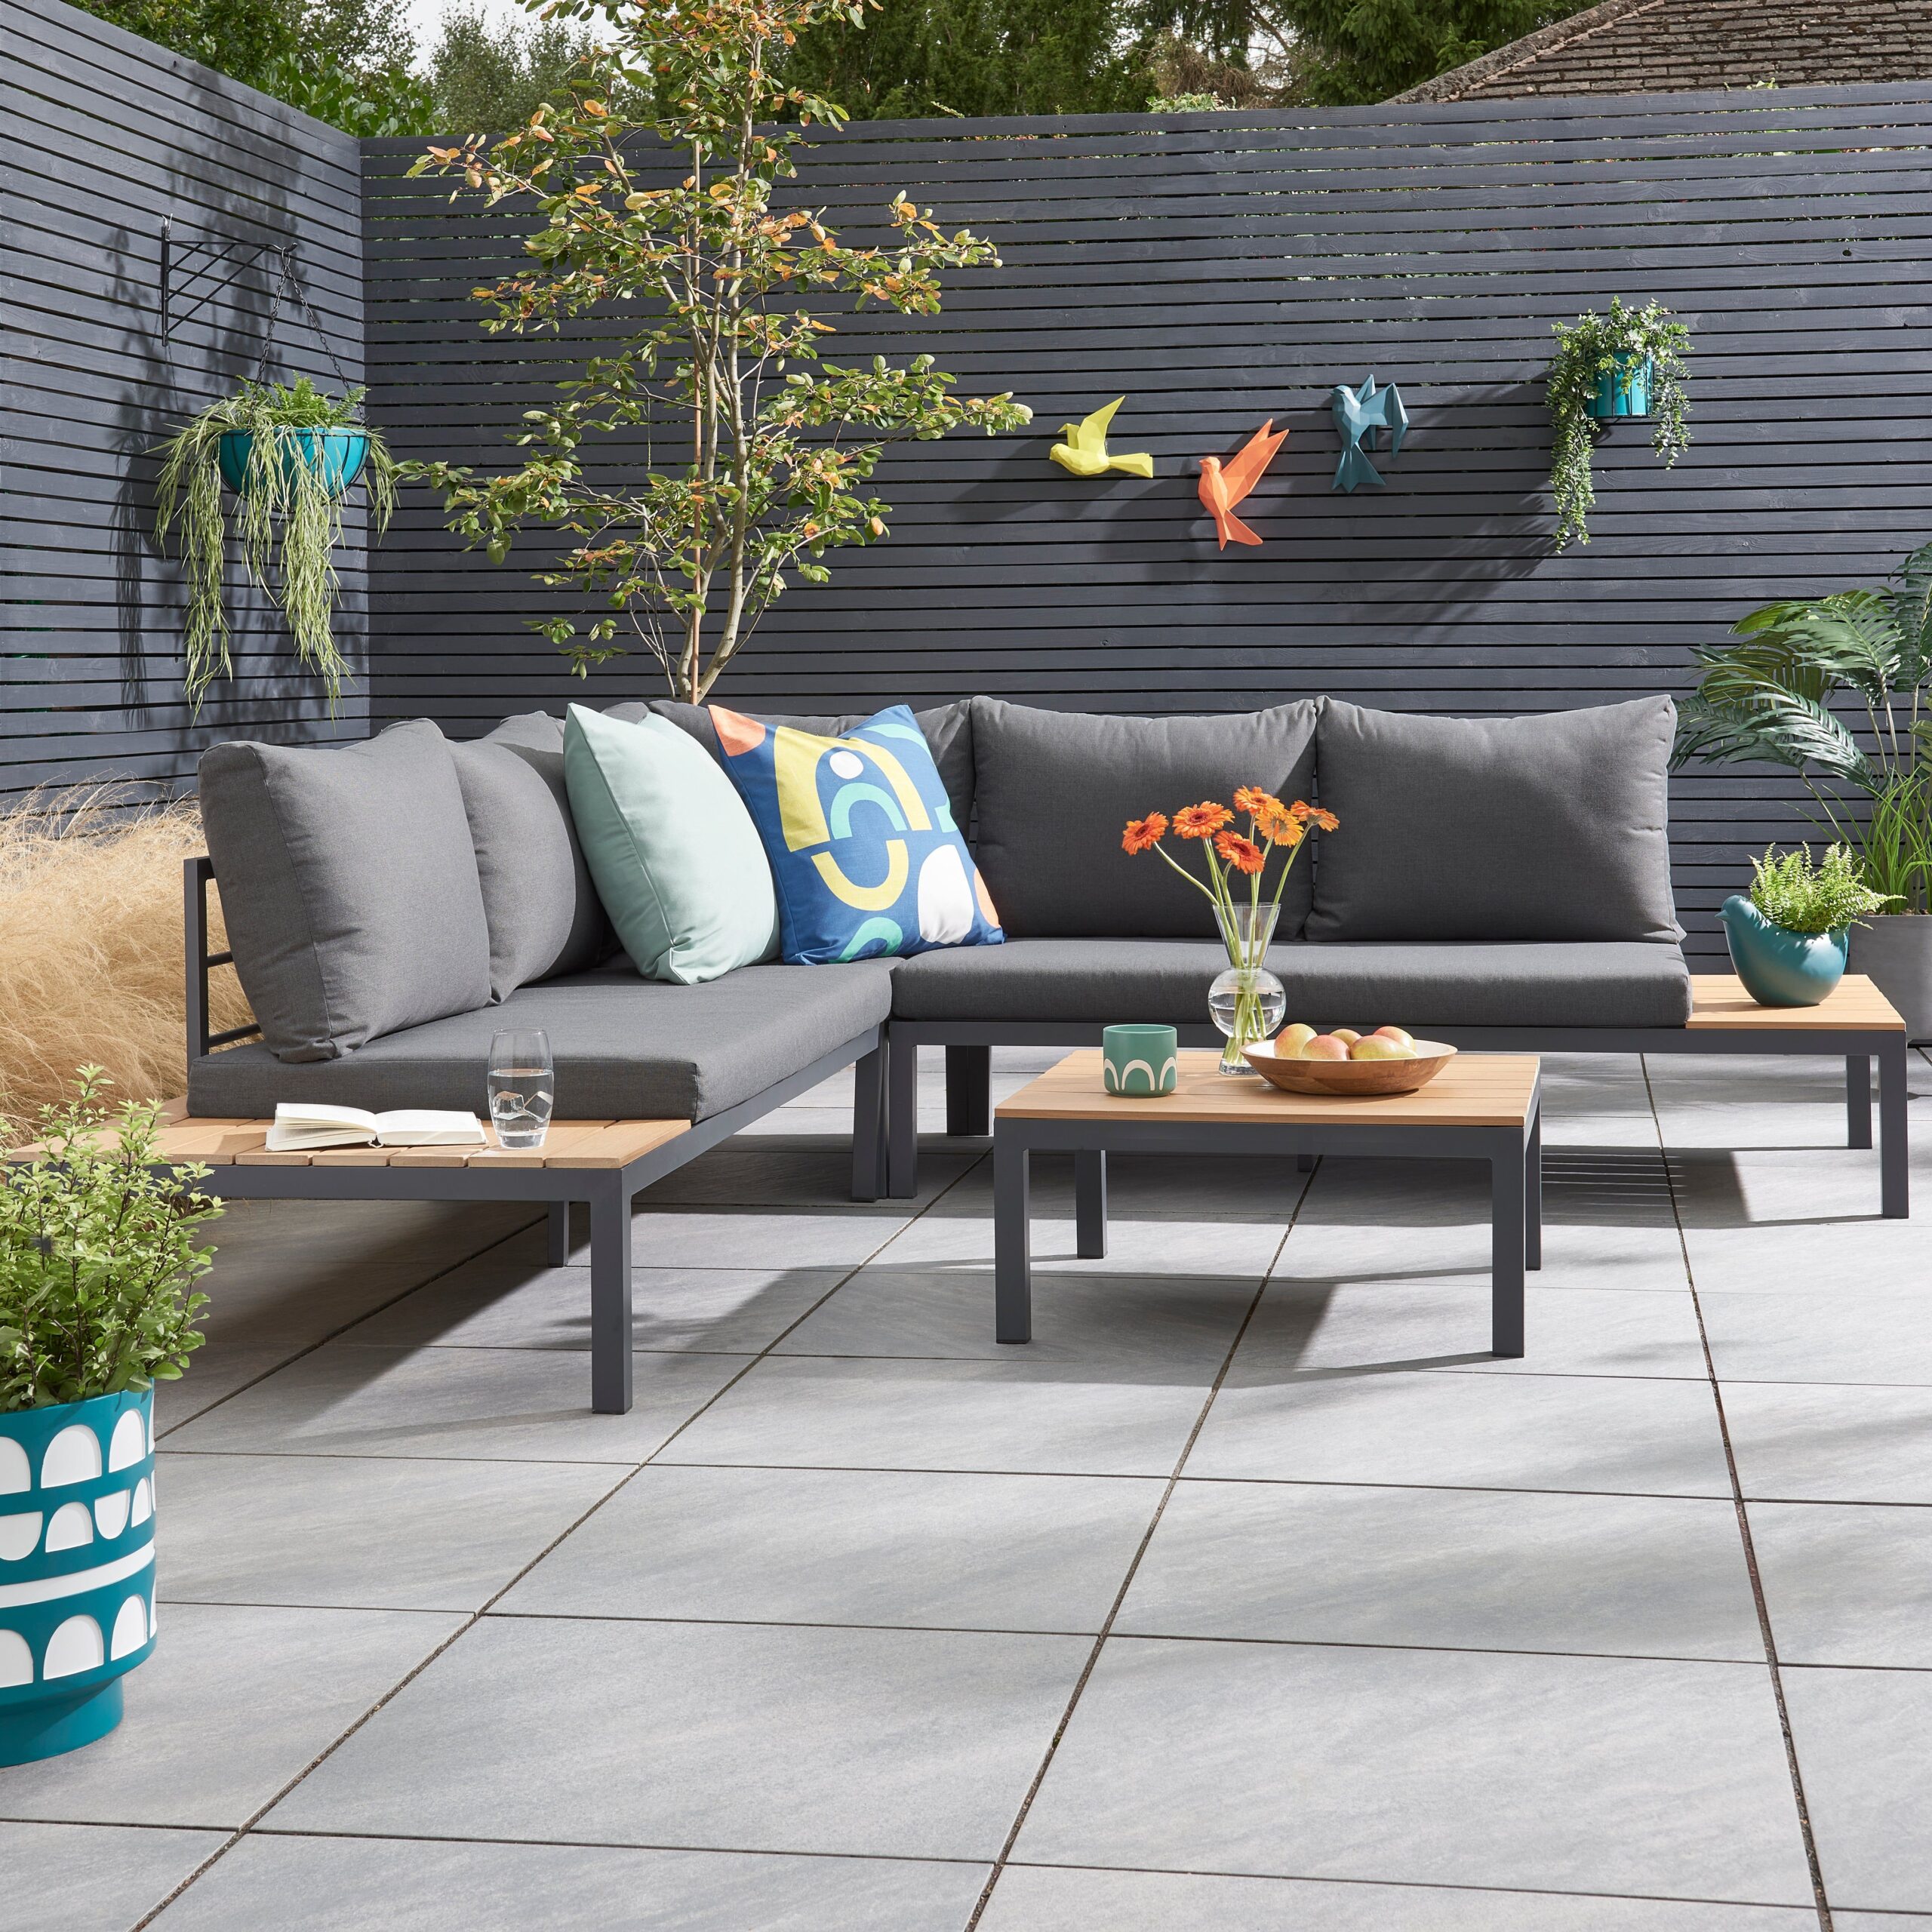 Garden Furniture: The Ultimate Outdoor Lounge Experience